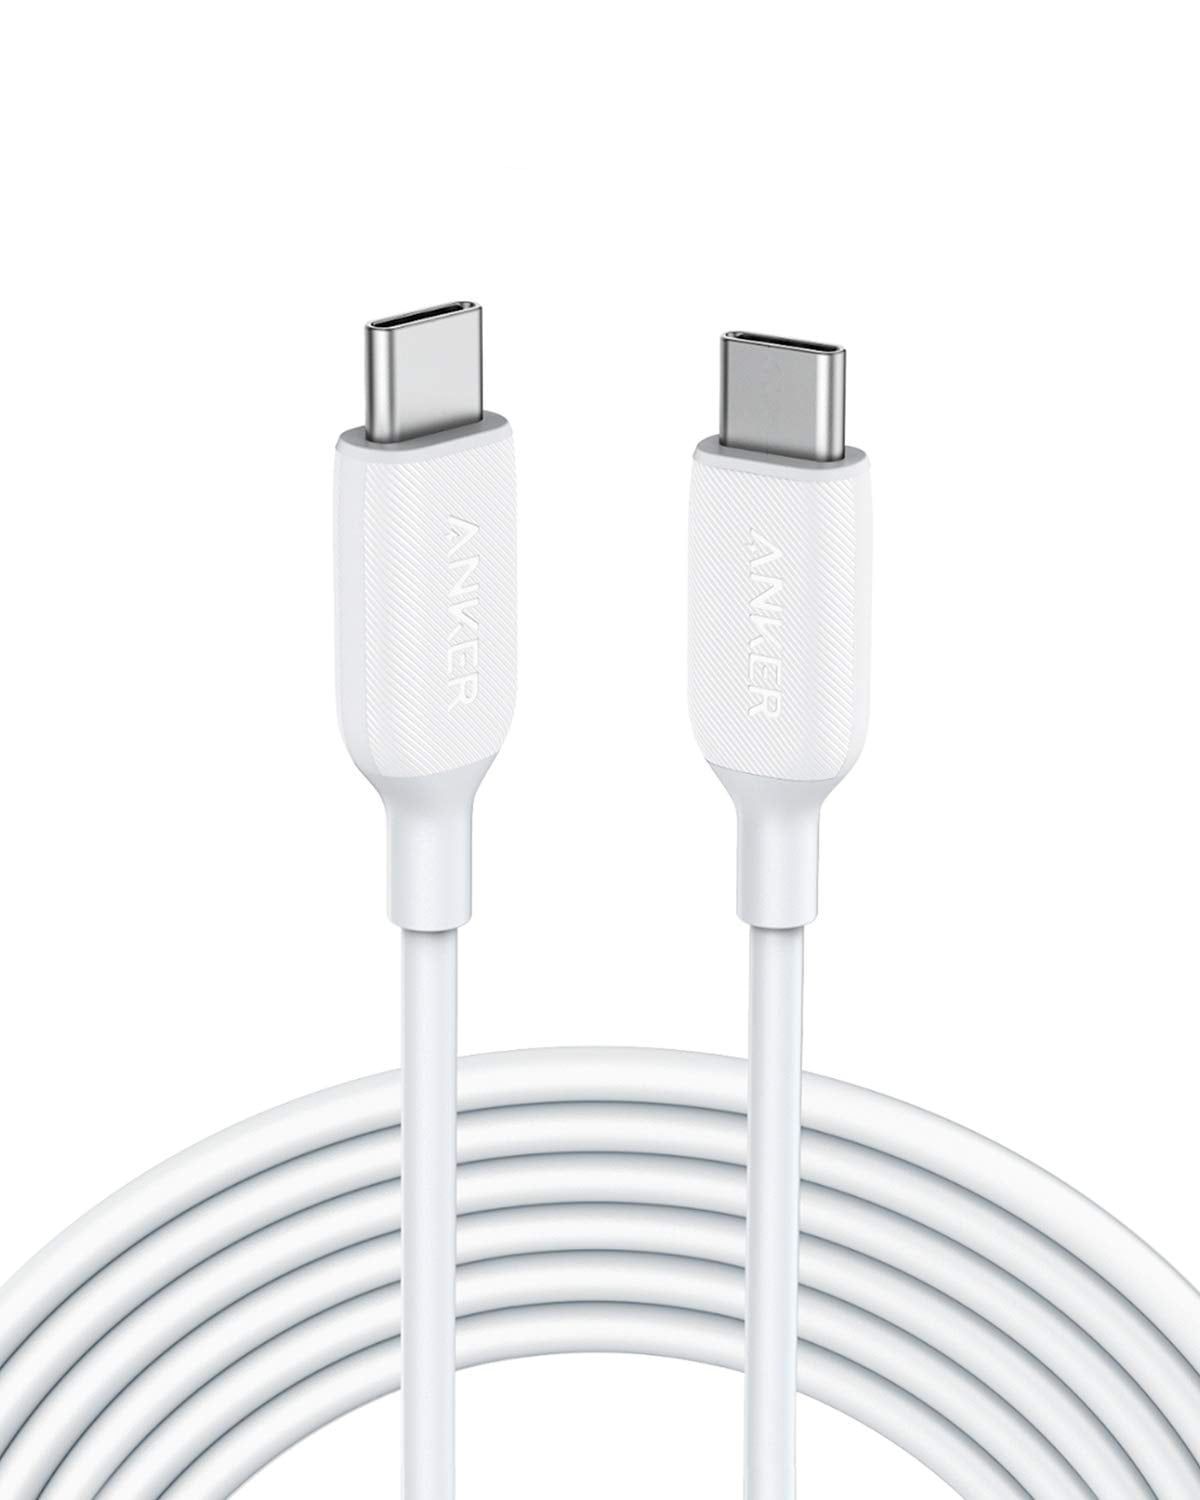 Anker USB C to USB C Cable, Powerline III Fast Charging Cord (10